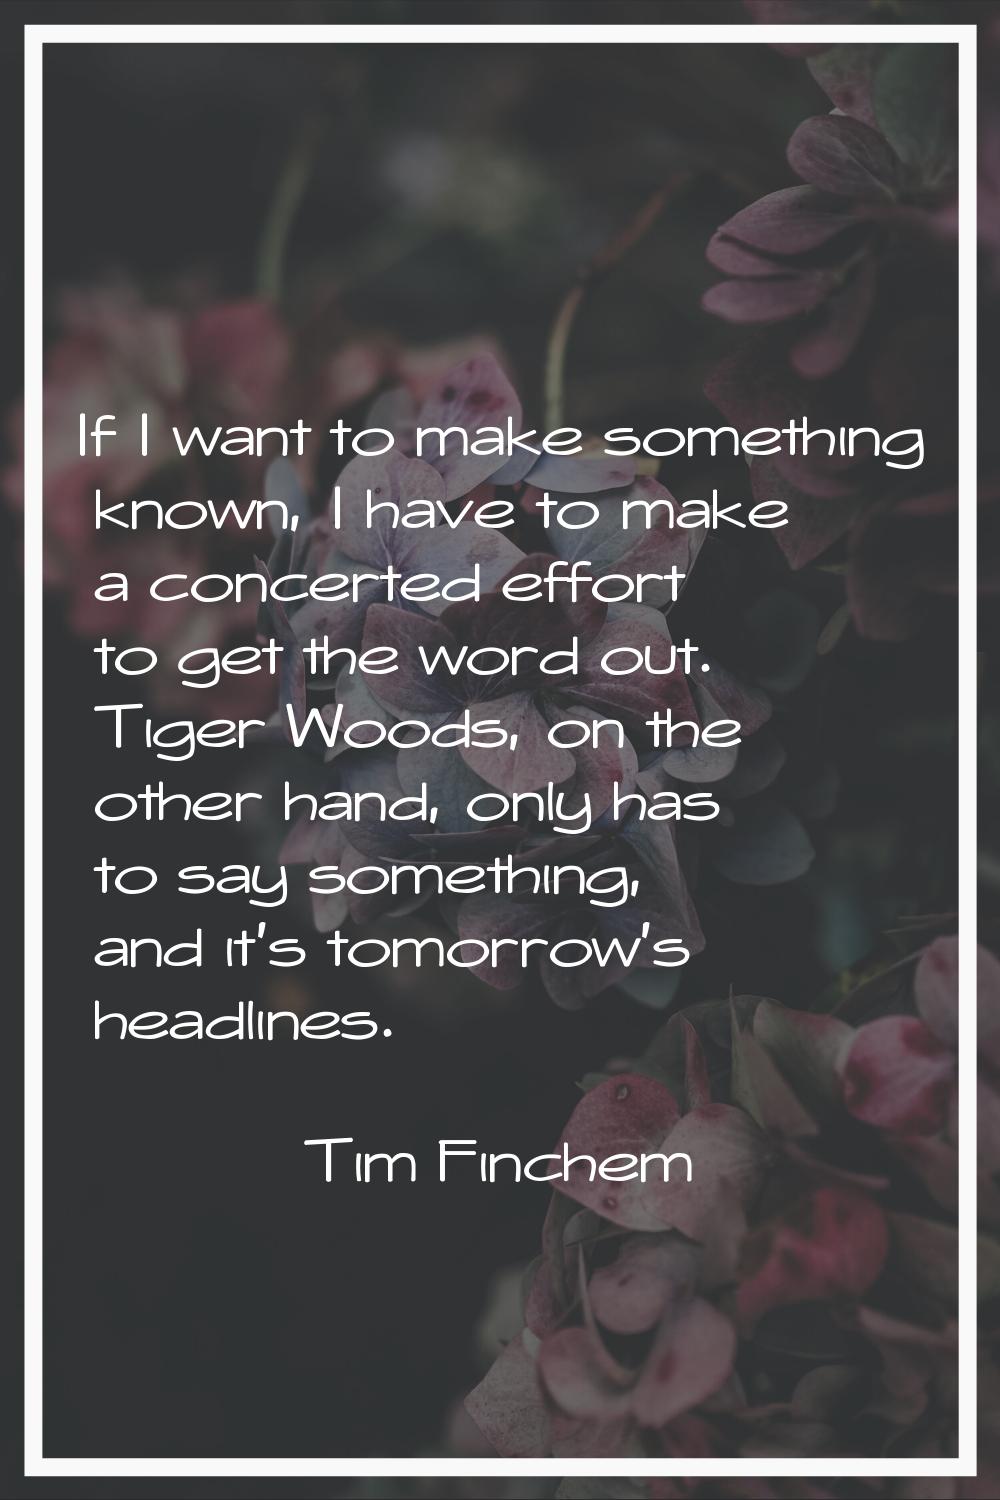 If I want to make something known, I have to make a concerted effort to get the word out. Tiger Woo